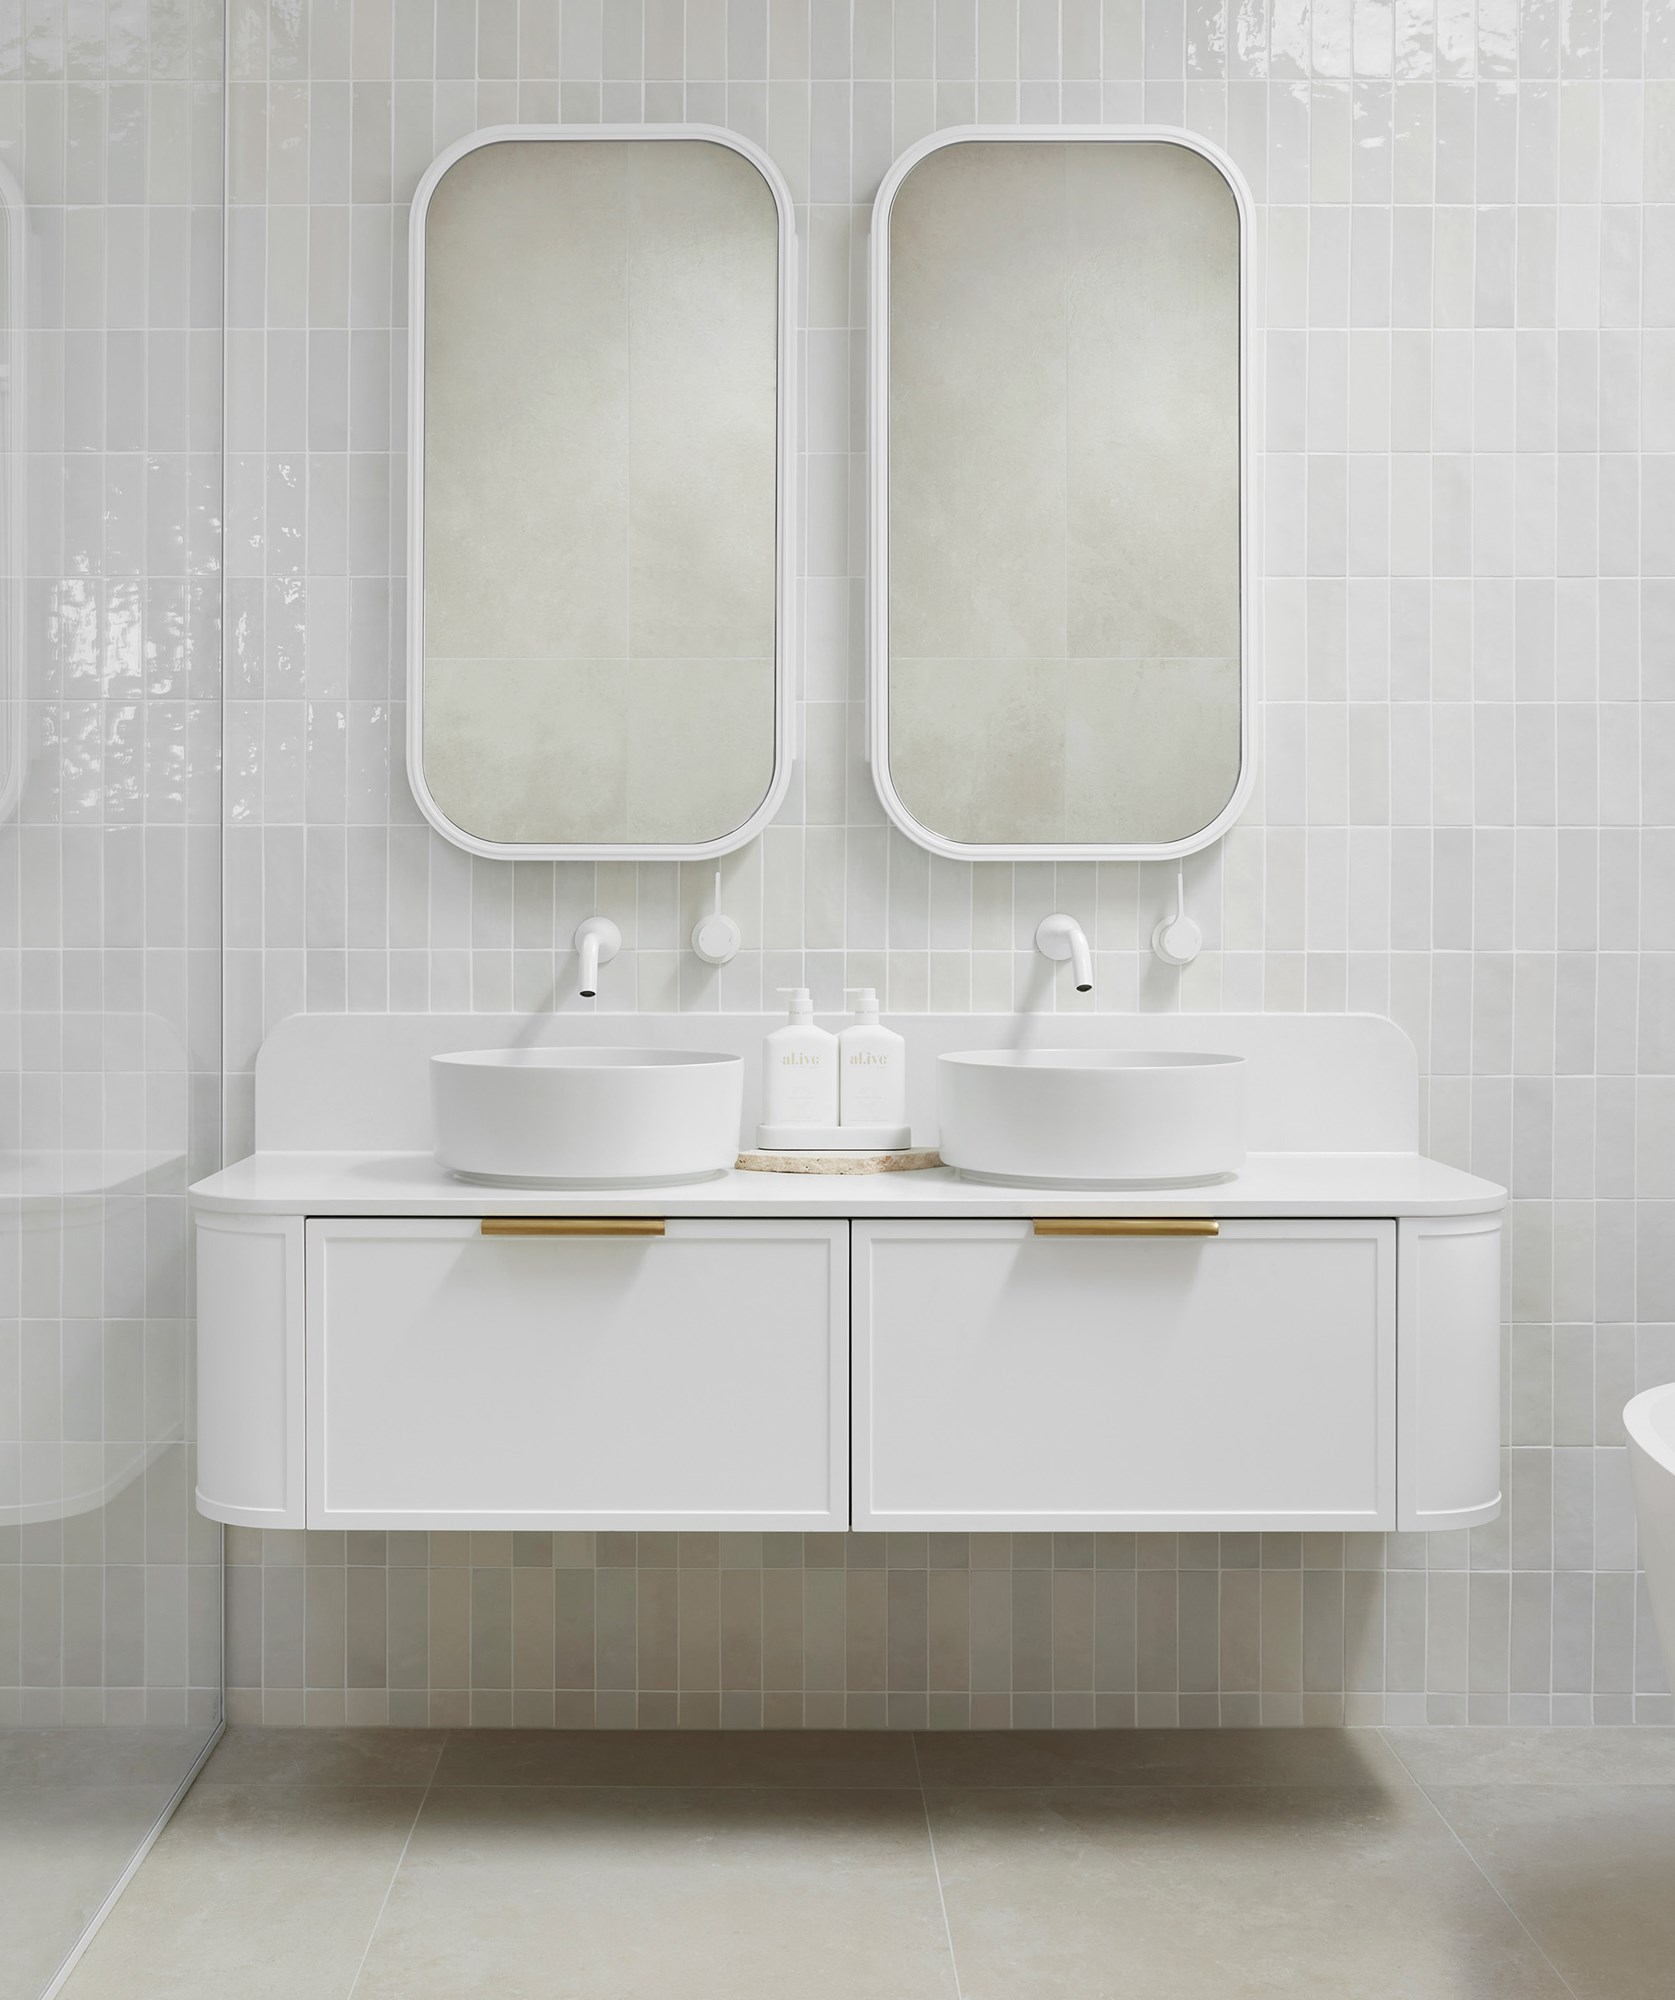 230717 Thedesignduo 171 Flo 1500 Dbl Ultra White 433X517 Web